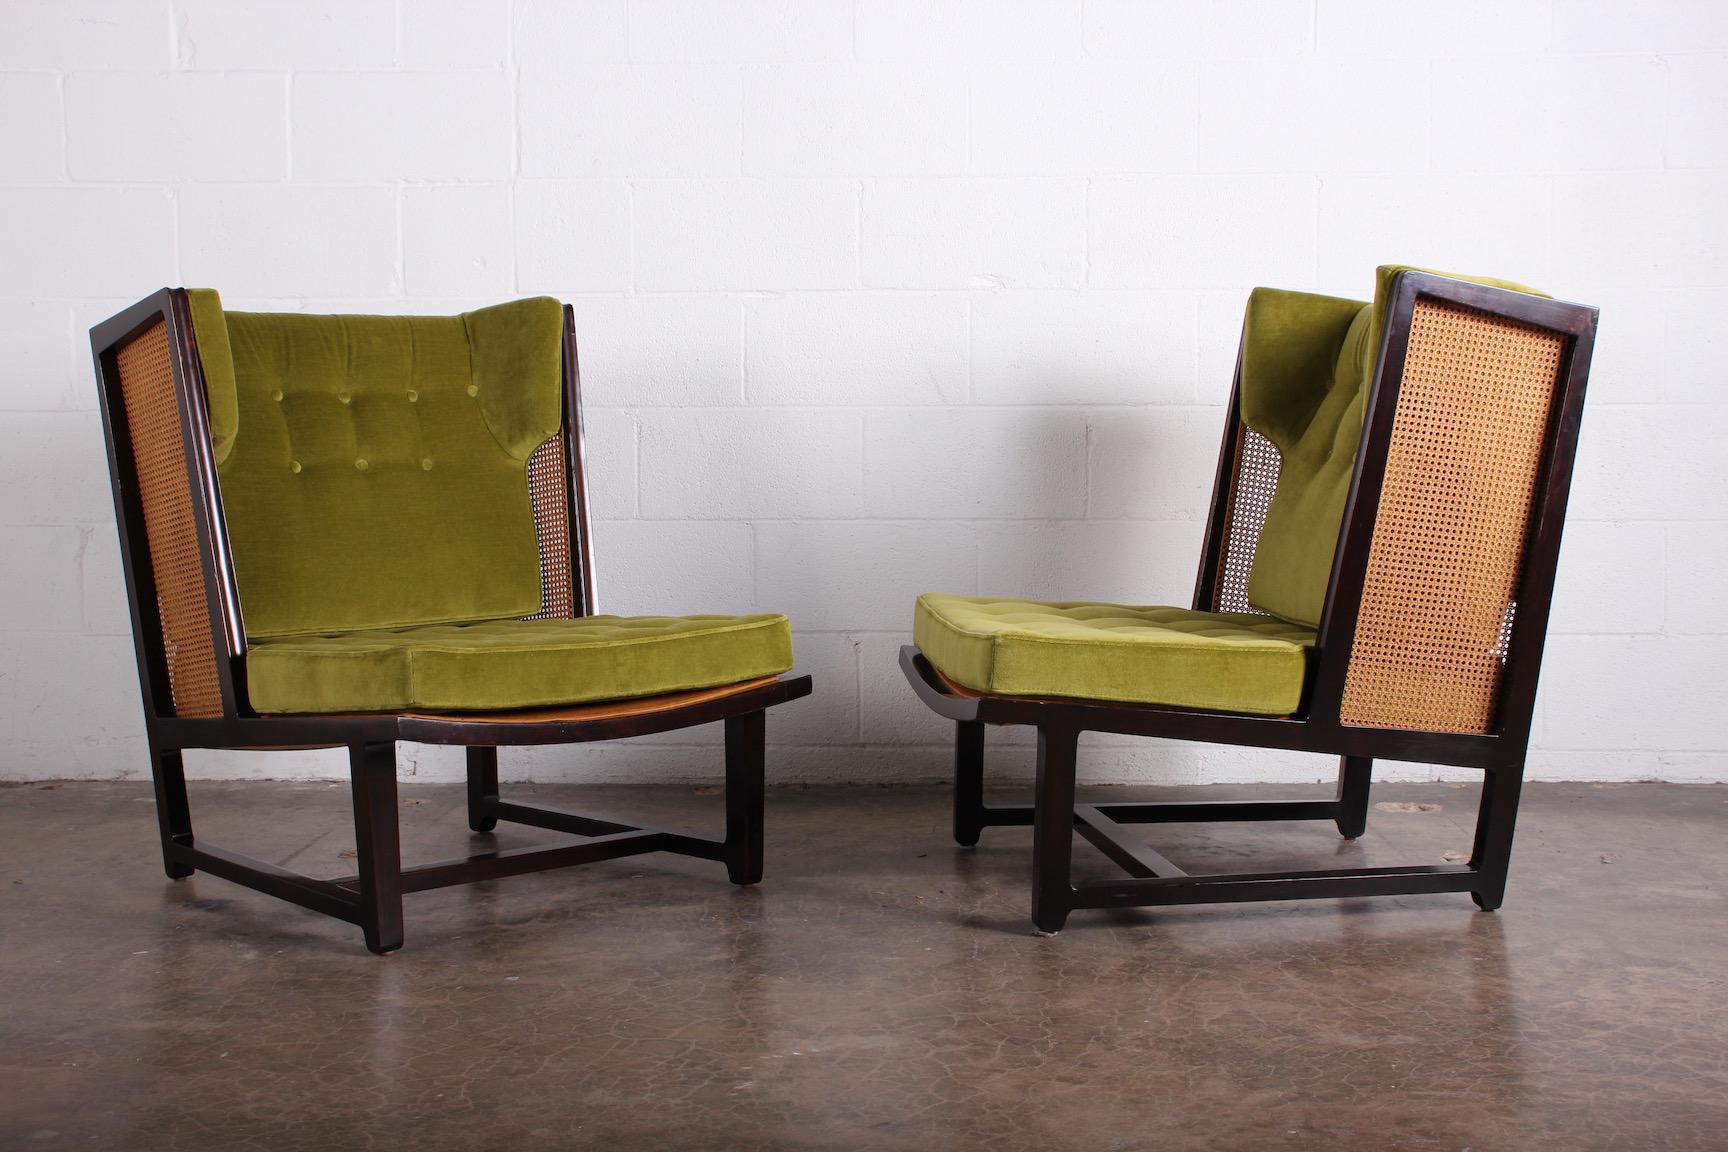 Pair of Cane Back Wing Chairs by Edward Wormley for Dunbar 2